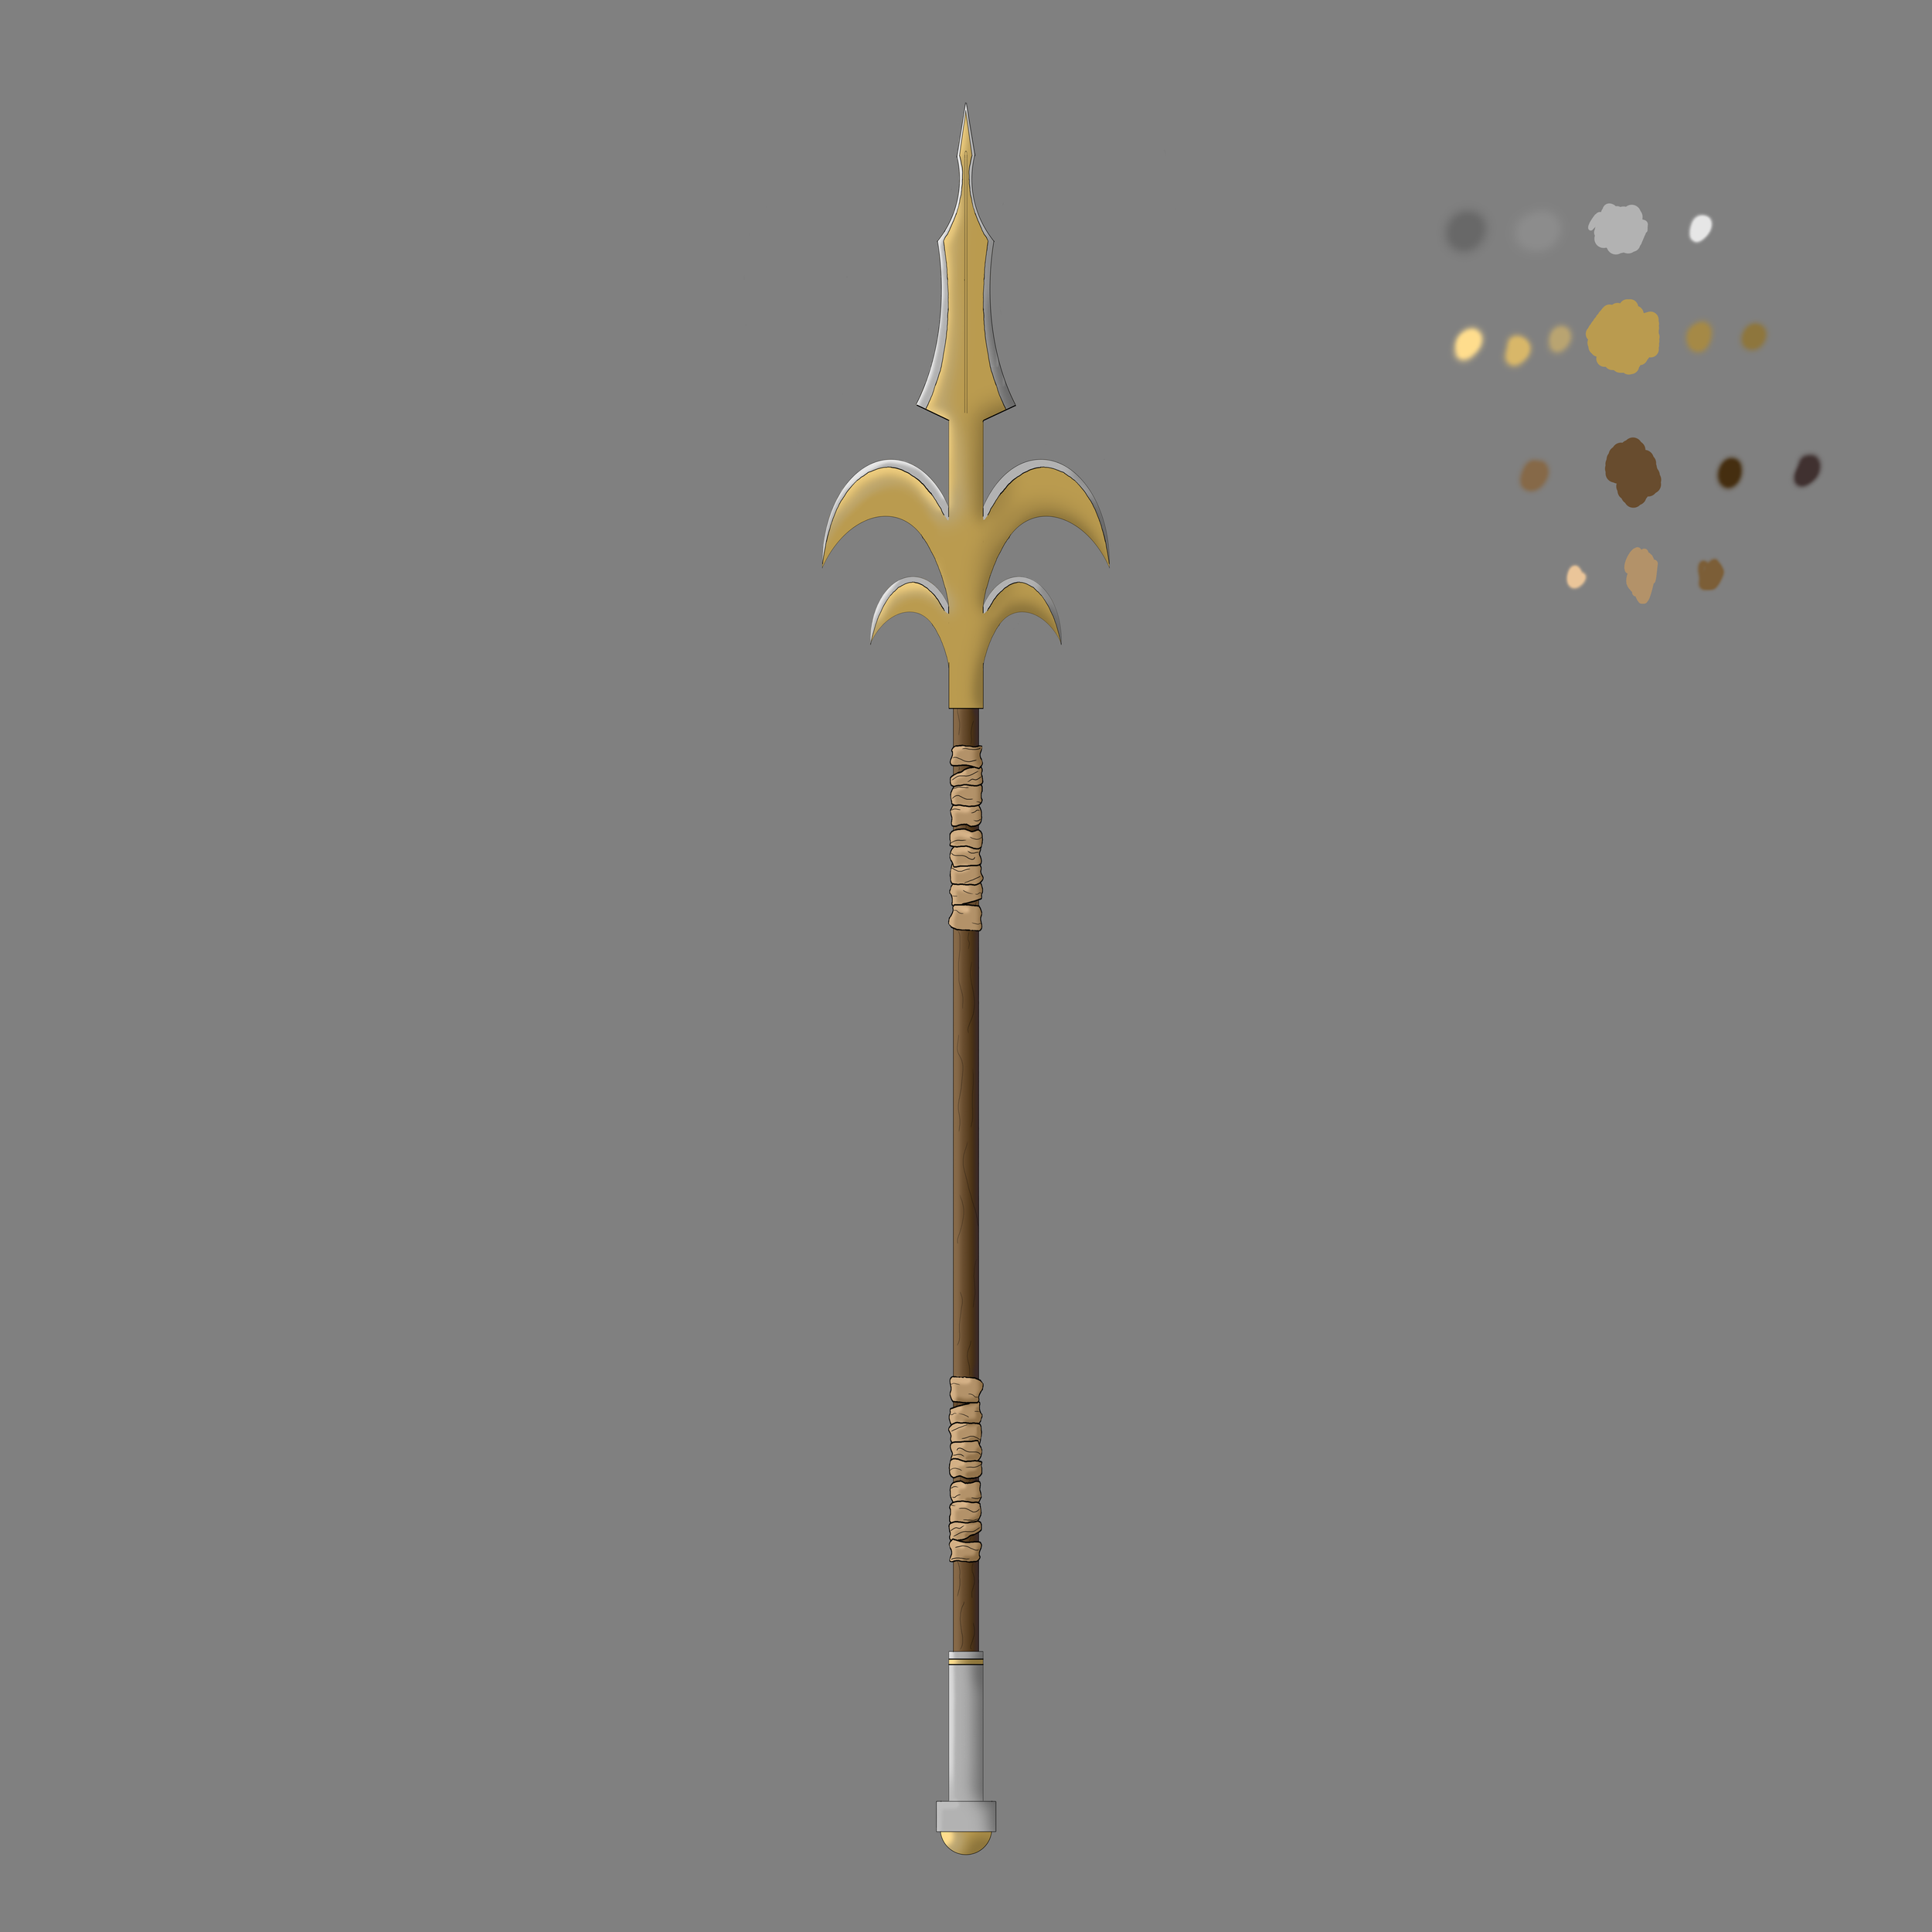 Spear_Sketch_Shaded.png